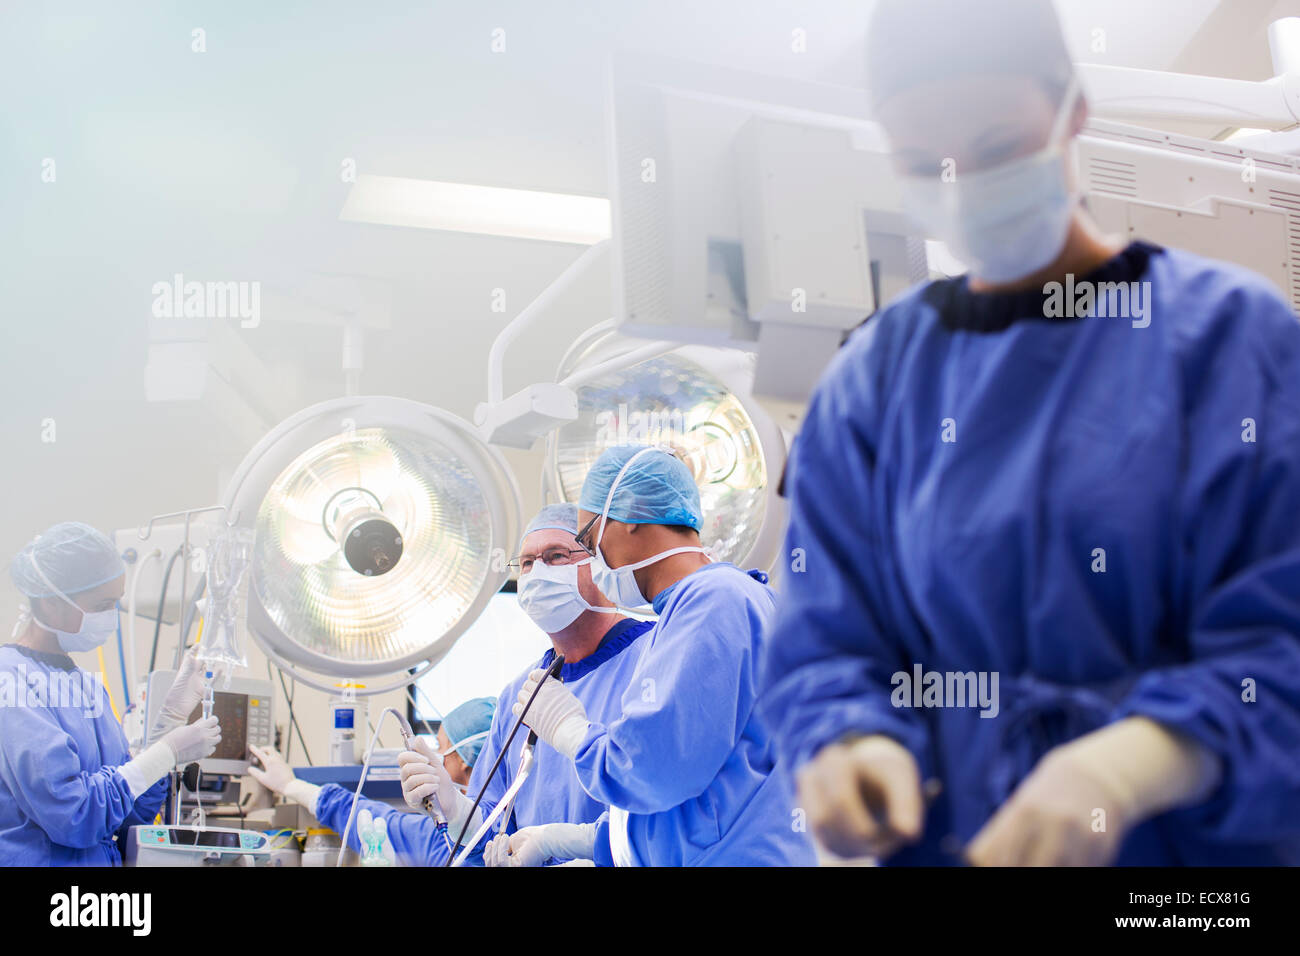 Young nurse preparing medical equipment during surgery Stock Photo